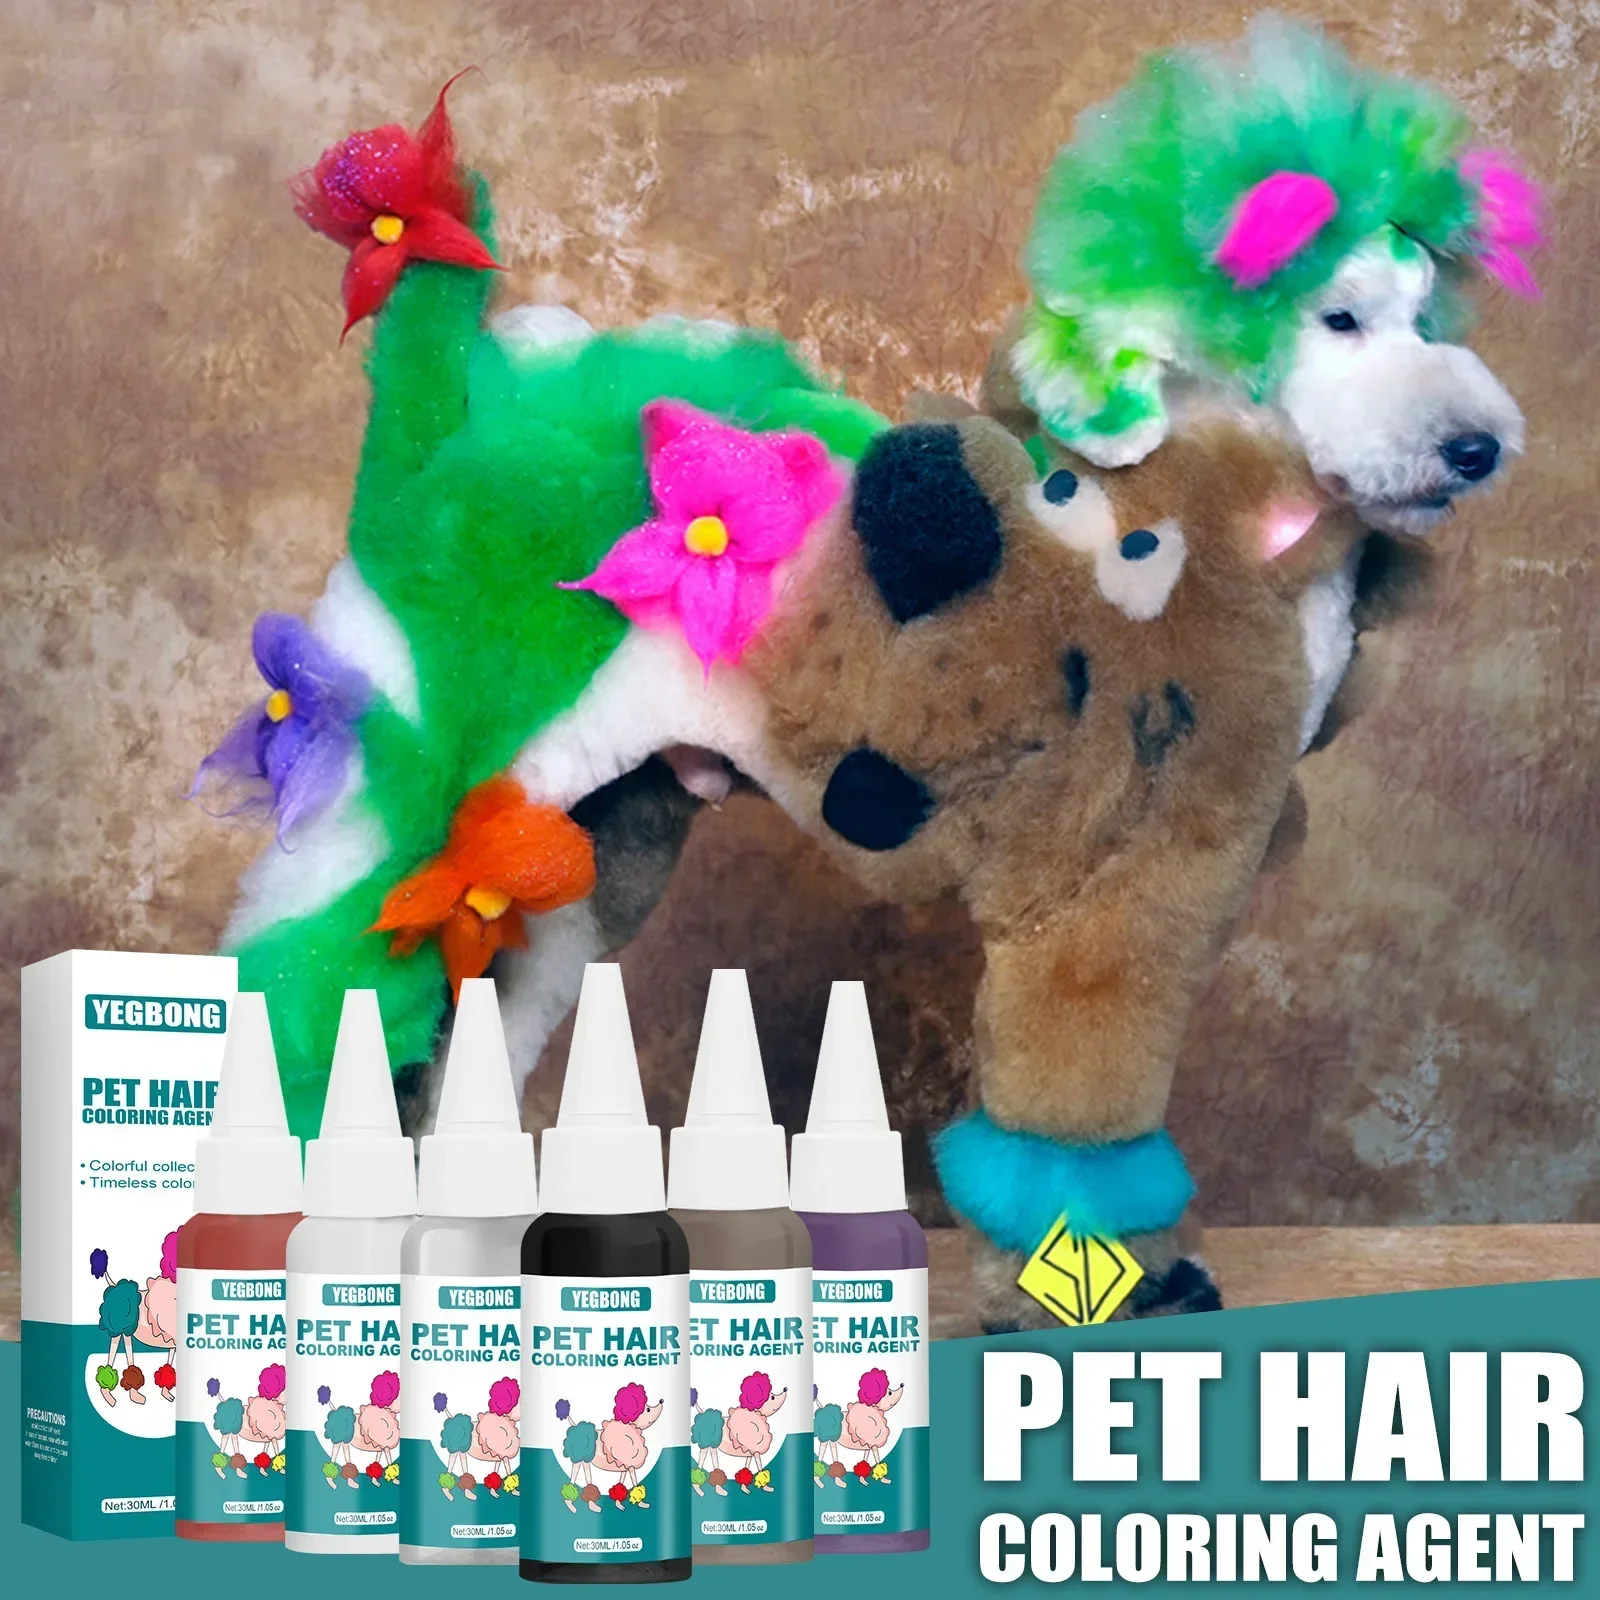 Semi-permanent Animals Grooming Coloring Dyes Pigment Agent Supplies Pet Hair Dye Cream Dog Cat Bright Color Lasting semi permanent animals grooming coloring dyes pigment agent supplies pet hair dye cream dog cat bright color lasting